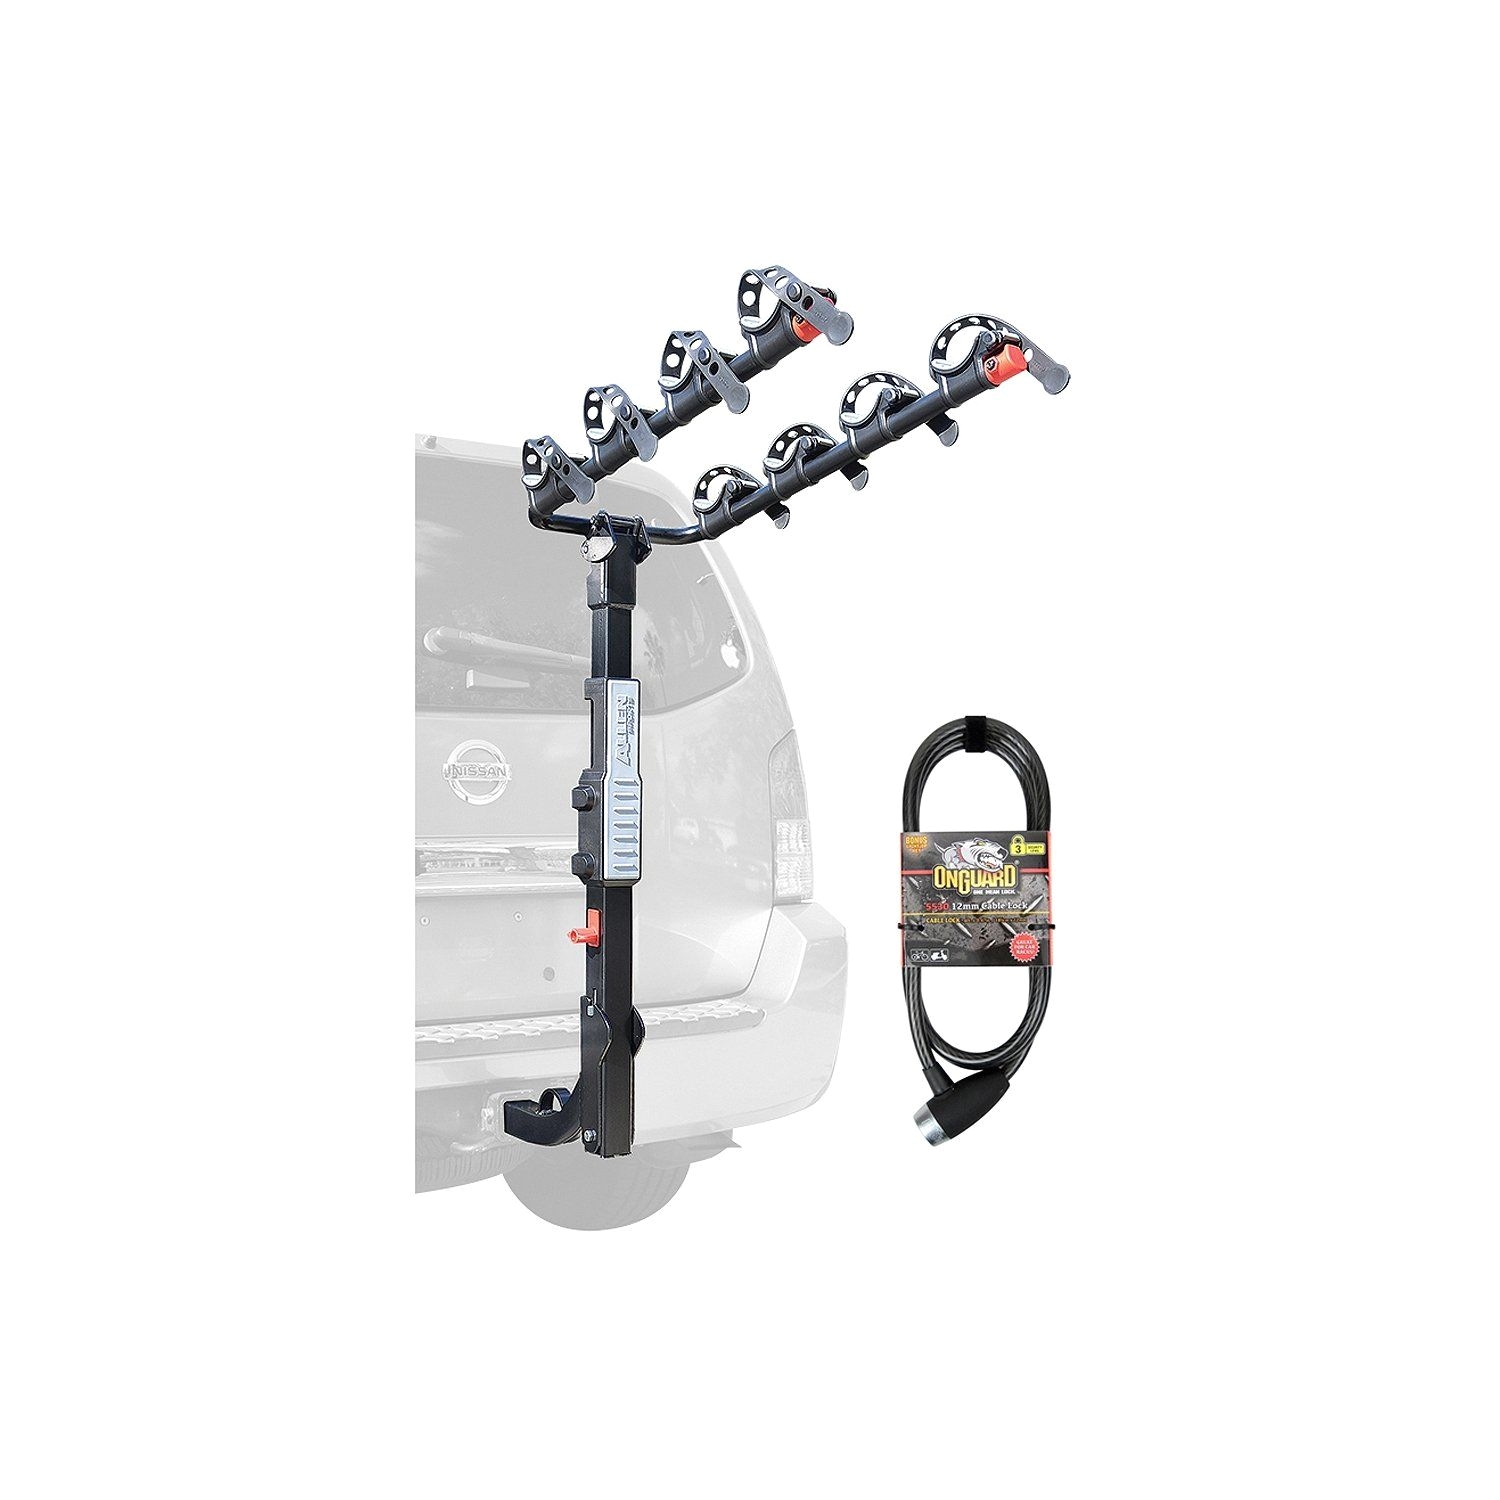 hitch mounted 4 bike carrier for 2 in receiver hitches padded spine shield protects your bicycle during transport